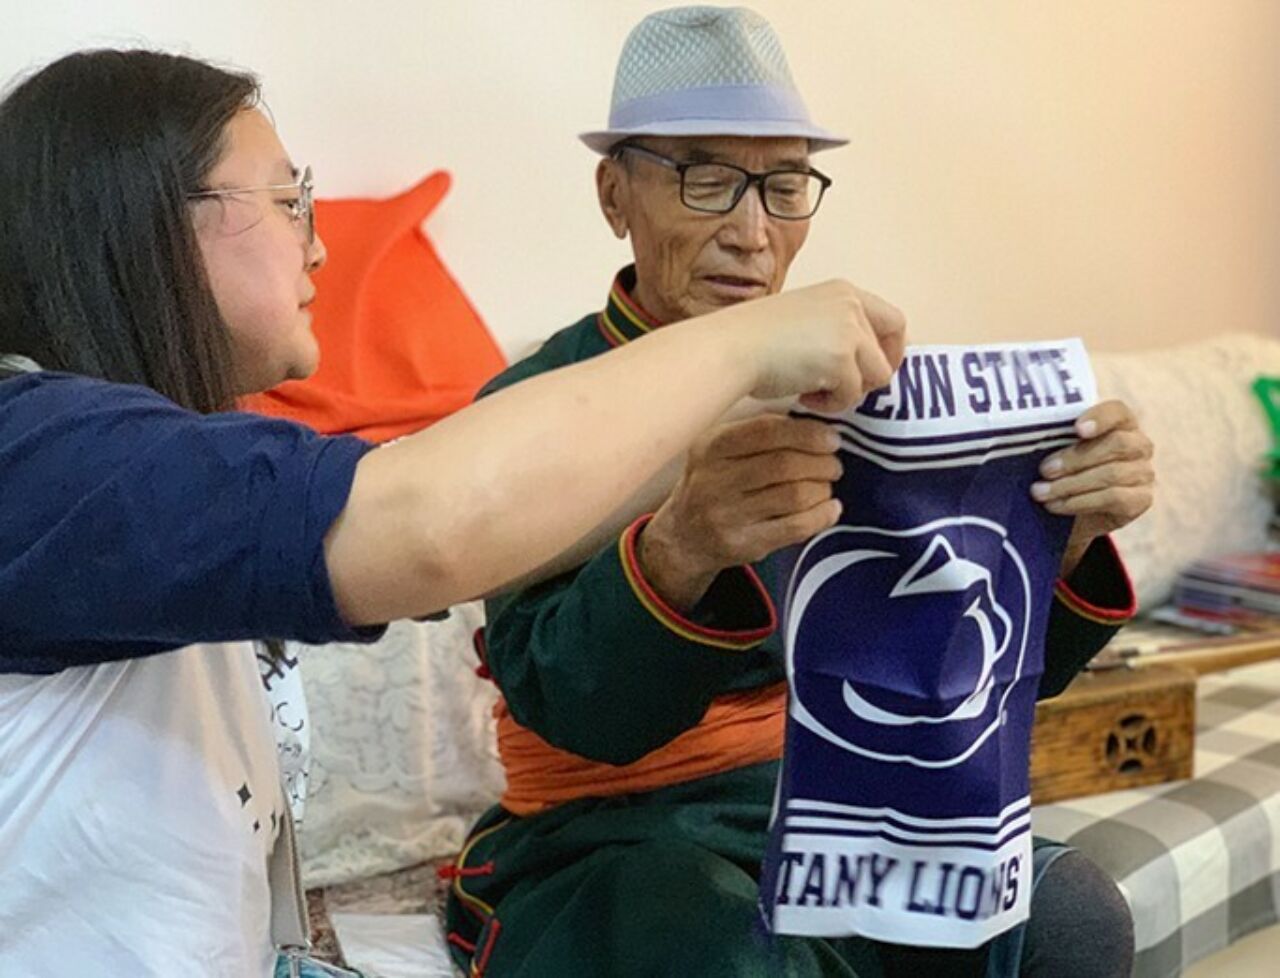 A music education Ph.D. student shows a blue and white Penn State Nittany Lions garden flag to an older individual sitting on a couch.